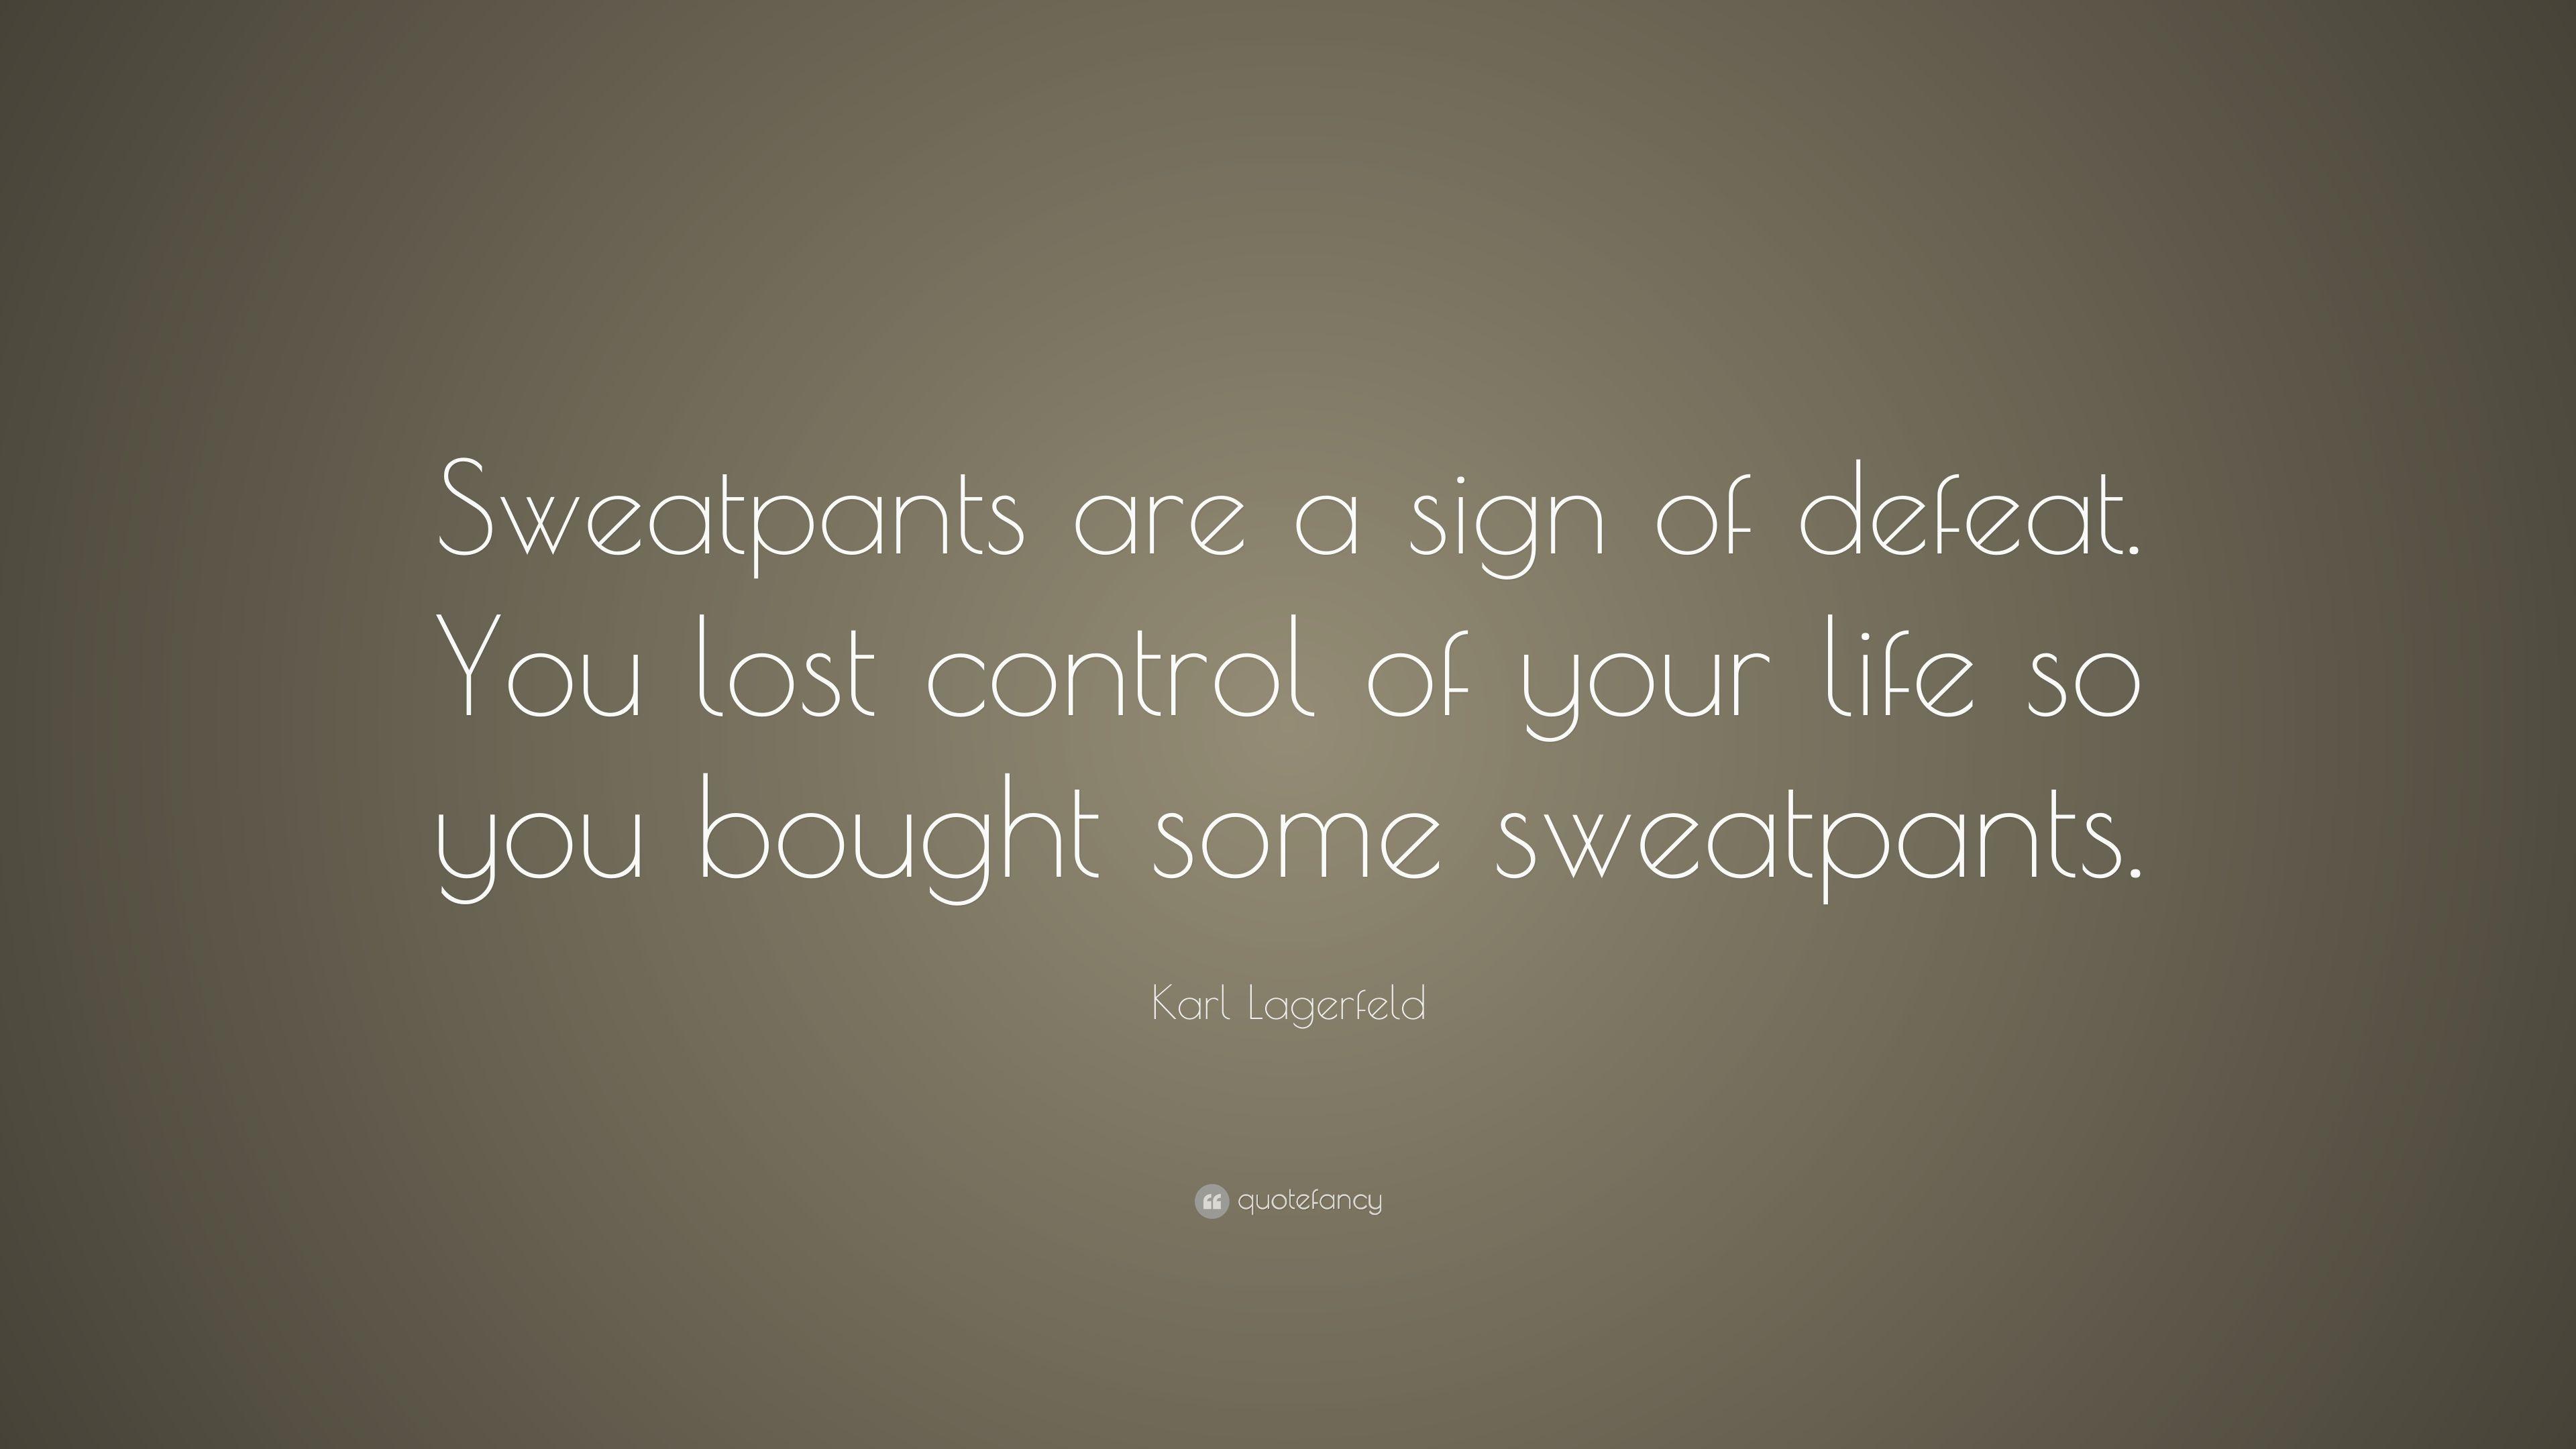 Karl Lagerfeld Quote: “Sweatpants are a sign of defeat. You lost